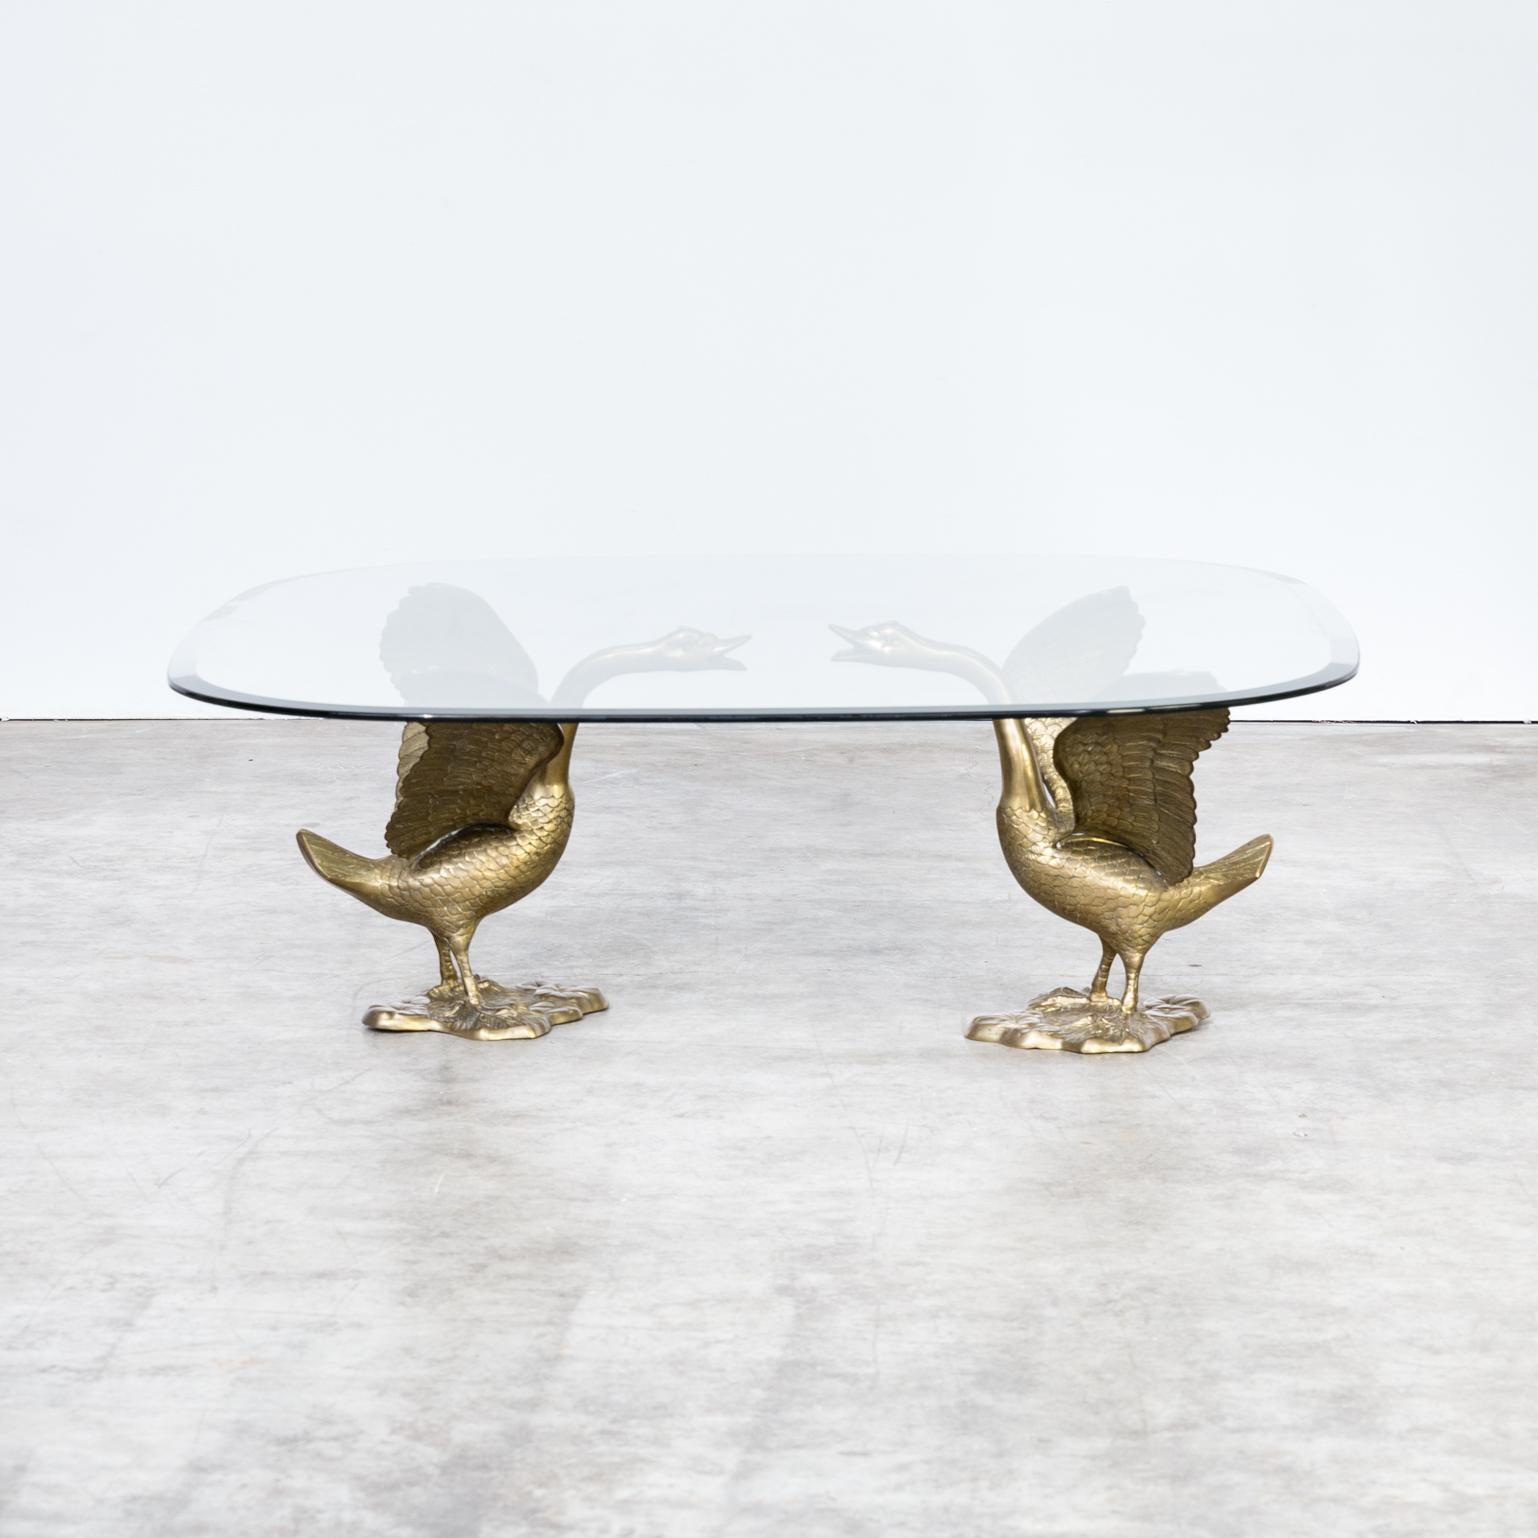 1970s sculptural ‘goose’ coffee table with glass table top. Beautiful brass goose who carry the glass table top coffee table on their wings. Sculptural design in good condition consistent with age and use.